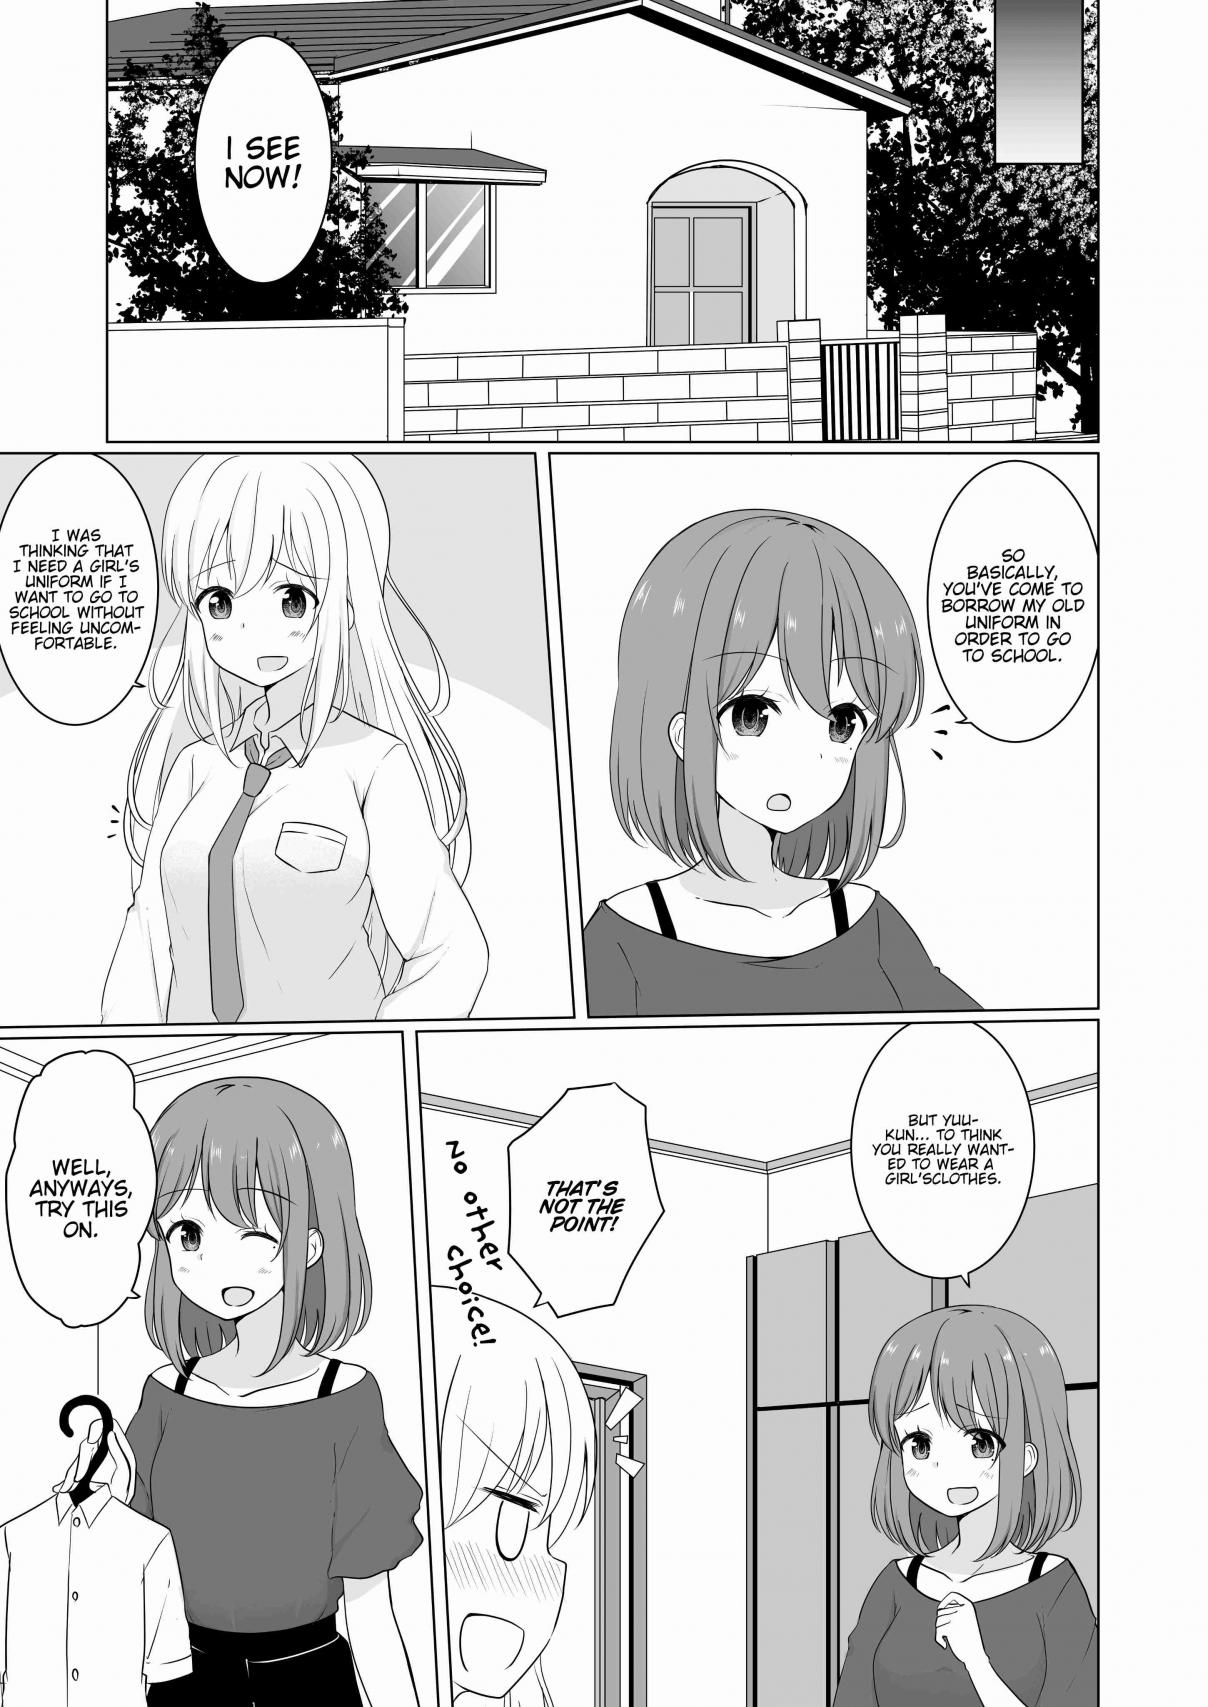 A Boy Who Loves Genderswap Got Genderswapped, So He Acts Out His Ideal Genderswap Girl Ch. 9